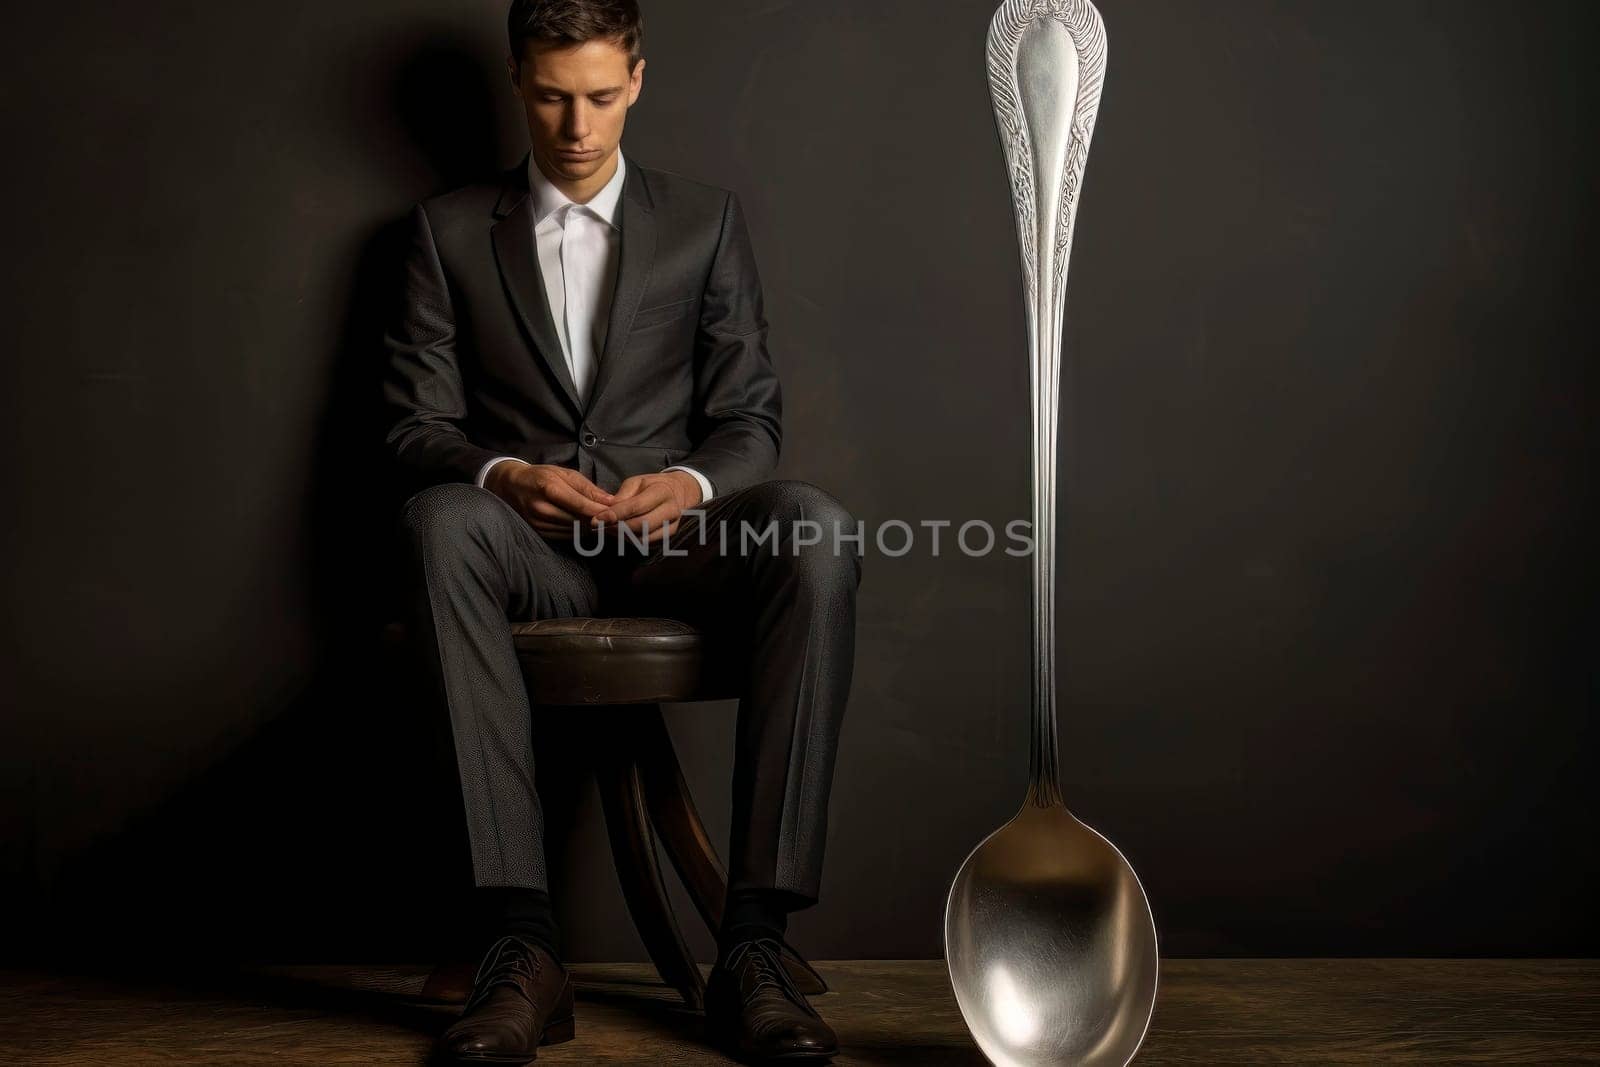 Intriguing surreal art of a seated, melancholic man with an oversized spoon